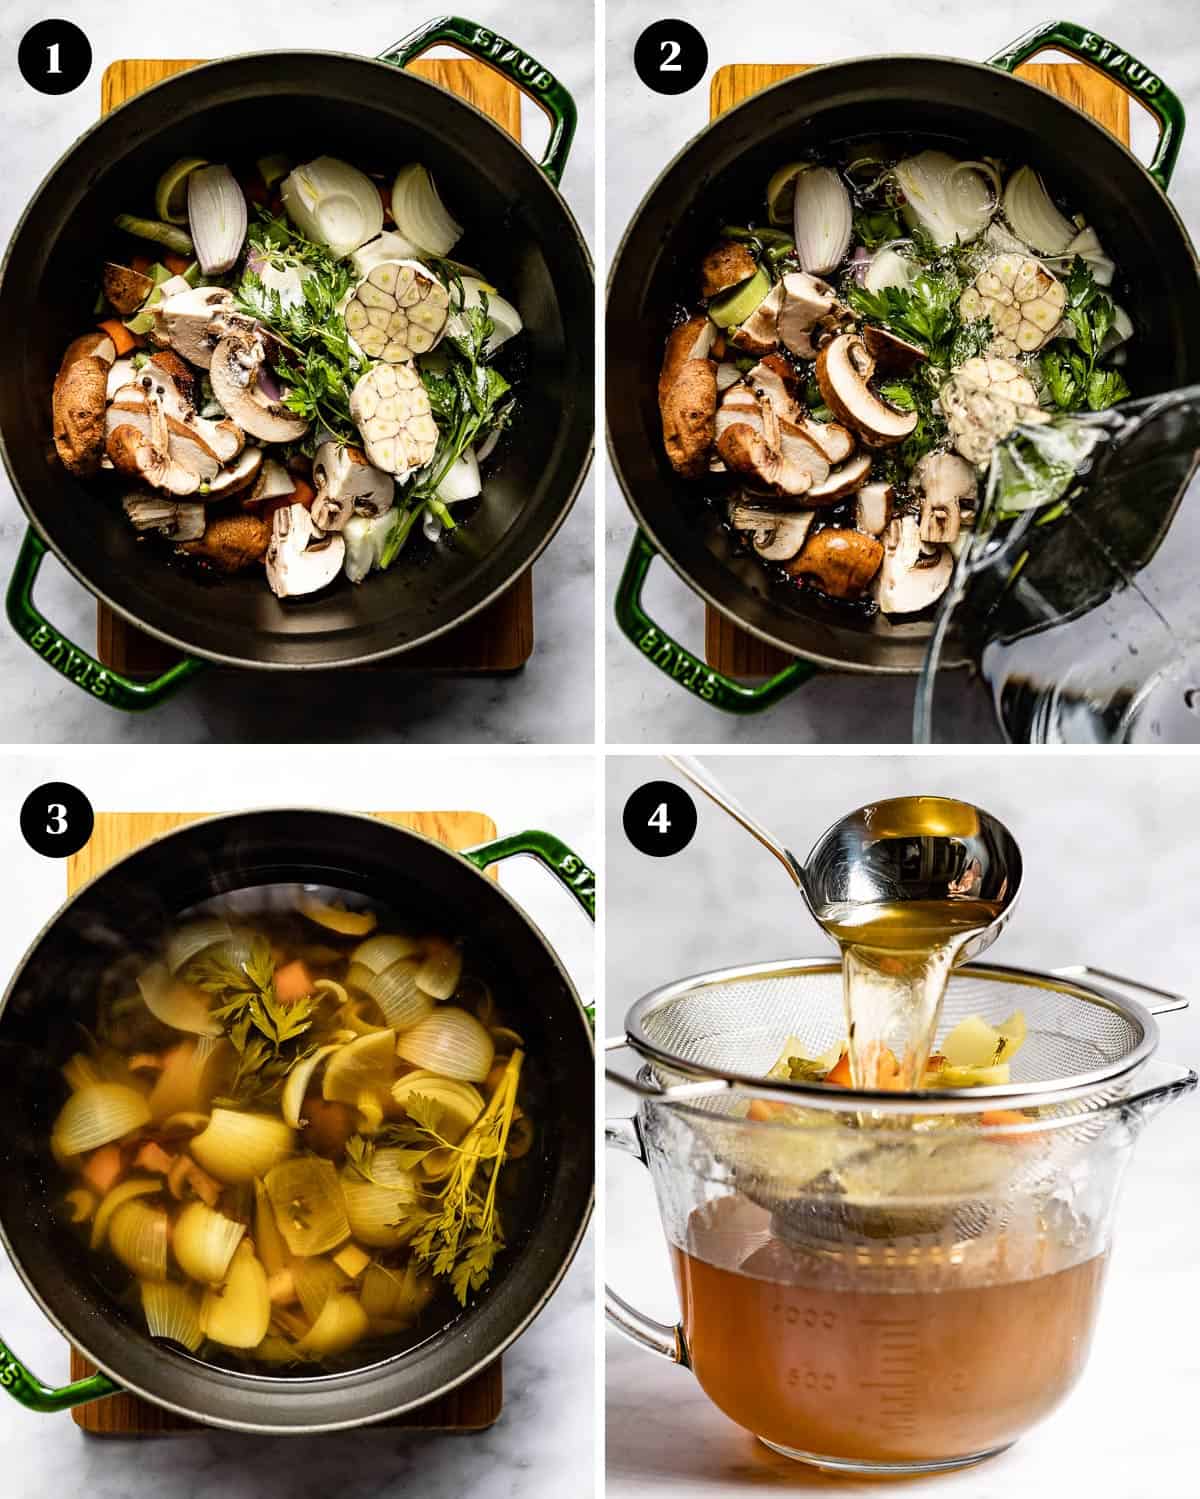 A collage of photos showing how to make your own vegetable broth.